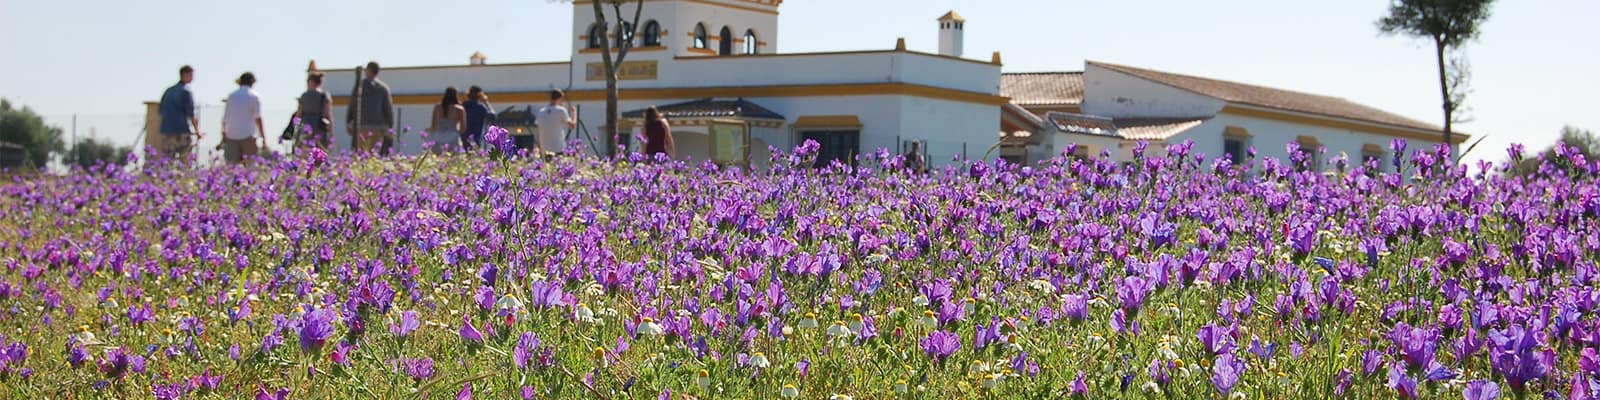 Students stand in a field of wildflowers in front of a white building